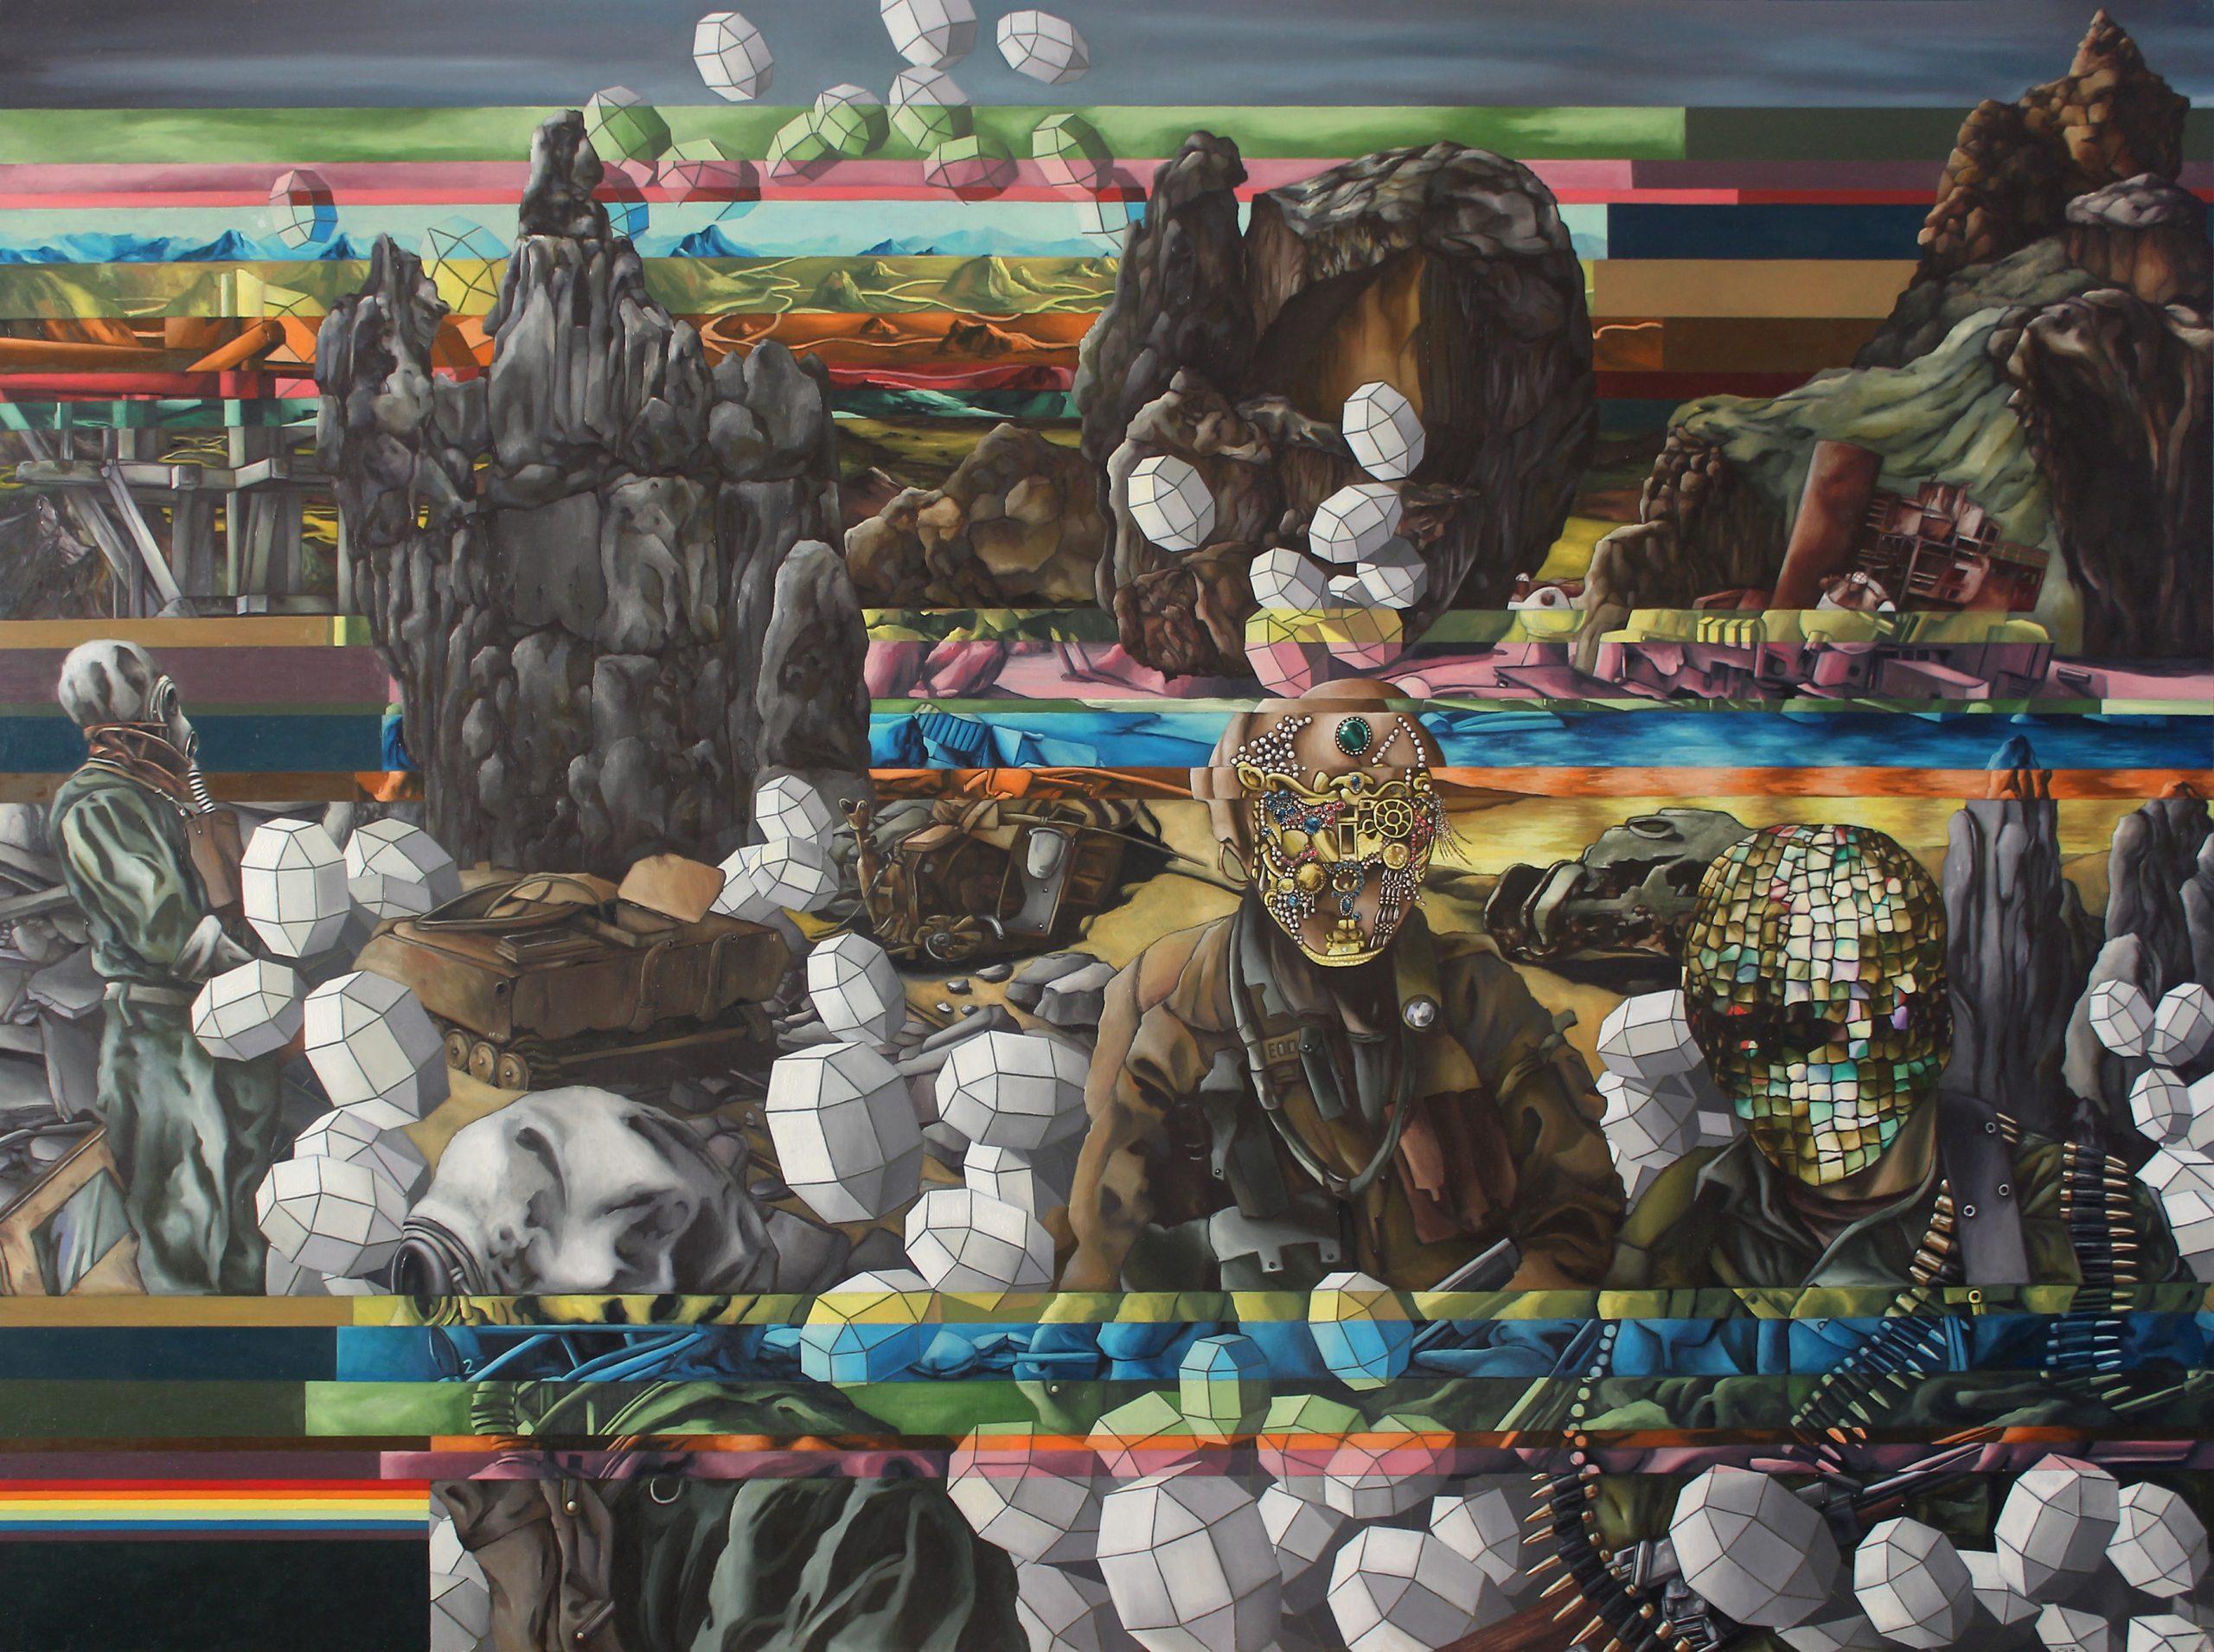 This is a horizontally oriented oil painting of a surreal post-apocalyptic landscape. Four masked figures are in the foreground--two wear gas masks, one a bejeweled face mask, and the last figure’s face is covered in a gold metallic mesh. They are dressed in army green and tan jumpsuits. One figure carries an automatic weapon and is draped in rounds of ammunition. The figures are surrounded by floating egg forms that have distinct planar shifts, which make them look like gems or perhaps blank human head forms. Three large rock formations are portrayed in the midground. A mountain range, stone wall, and crumbling architectural elements are in the background. The entire scene is bisected with intermittent transparent strips of color that recall digital glitches. Here is how the artist describes the meaning of the work: My paintings are post-apocalyptic paintings of possible non-linear narratives constructed from pieces of the past, contemporary and future. The work reflects my own experience of being adopted from Korea, combining the Eastern landscapes of Asian painting with the traditional oil painting techniques of early Flemish and Italian painting. The subject matter depicted reflects my own interest in science fiction themes such as nuclear apocalypse, human adaptability to a changing world, digital imaging, time travel and identity. The work is about these contrasts and juxtapositions between the past and future, heightened color areas and neutral colors, East and West, traditional oil painting and digital imaging, realism and abstraction of some forms and what we consider natural and artificial. The paintings are not about absolute dividing lines between these themes but rather about the images existing in a grey area between these absolutes. Making sense of these images isn't about the resolution of the narrative but the continued journey of seeing these themes and subjects collide and re-combine in unexpected ways.